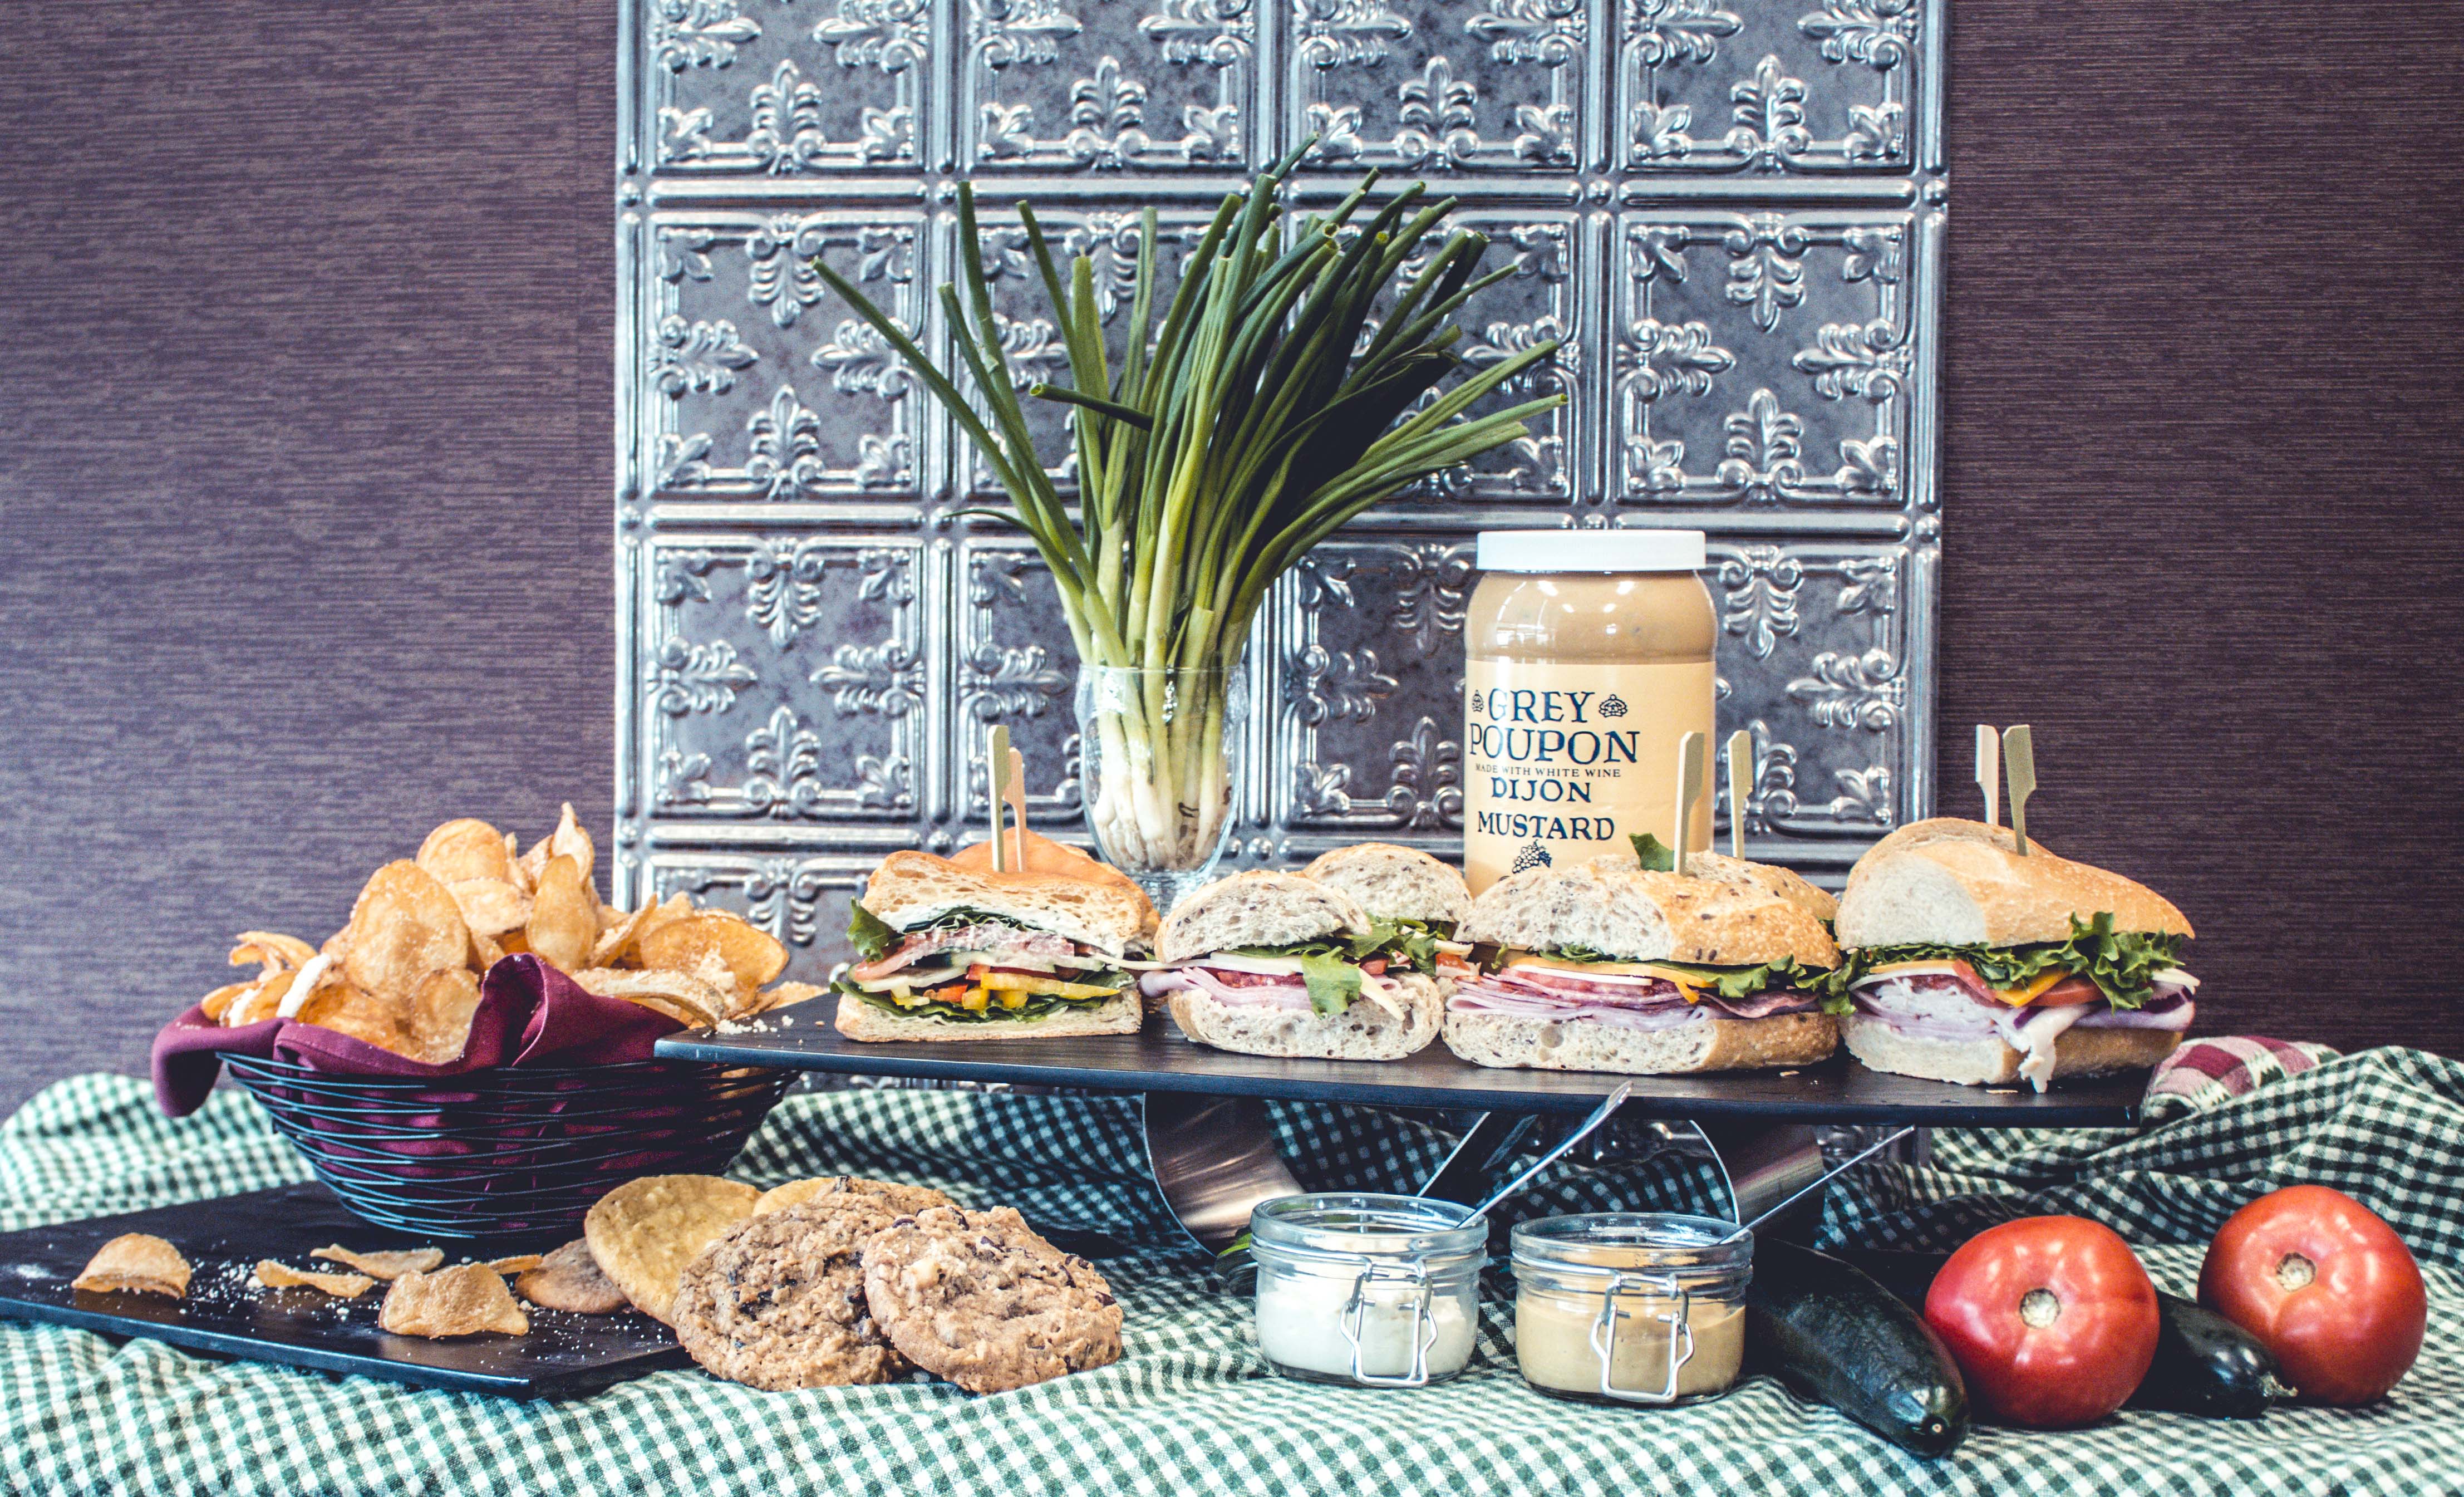 Lunch display that includes fresh-made sandwiches, chips, and baked cookies